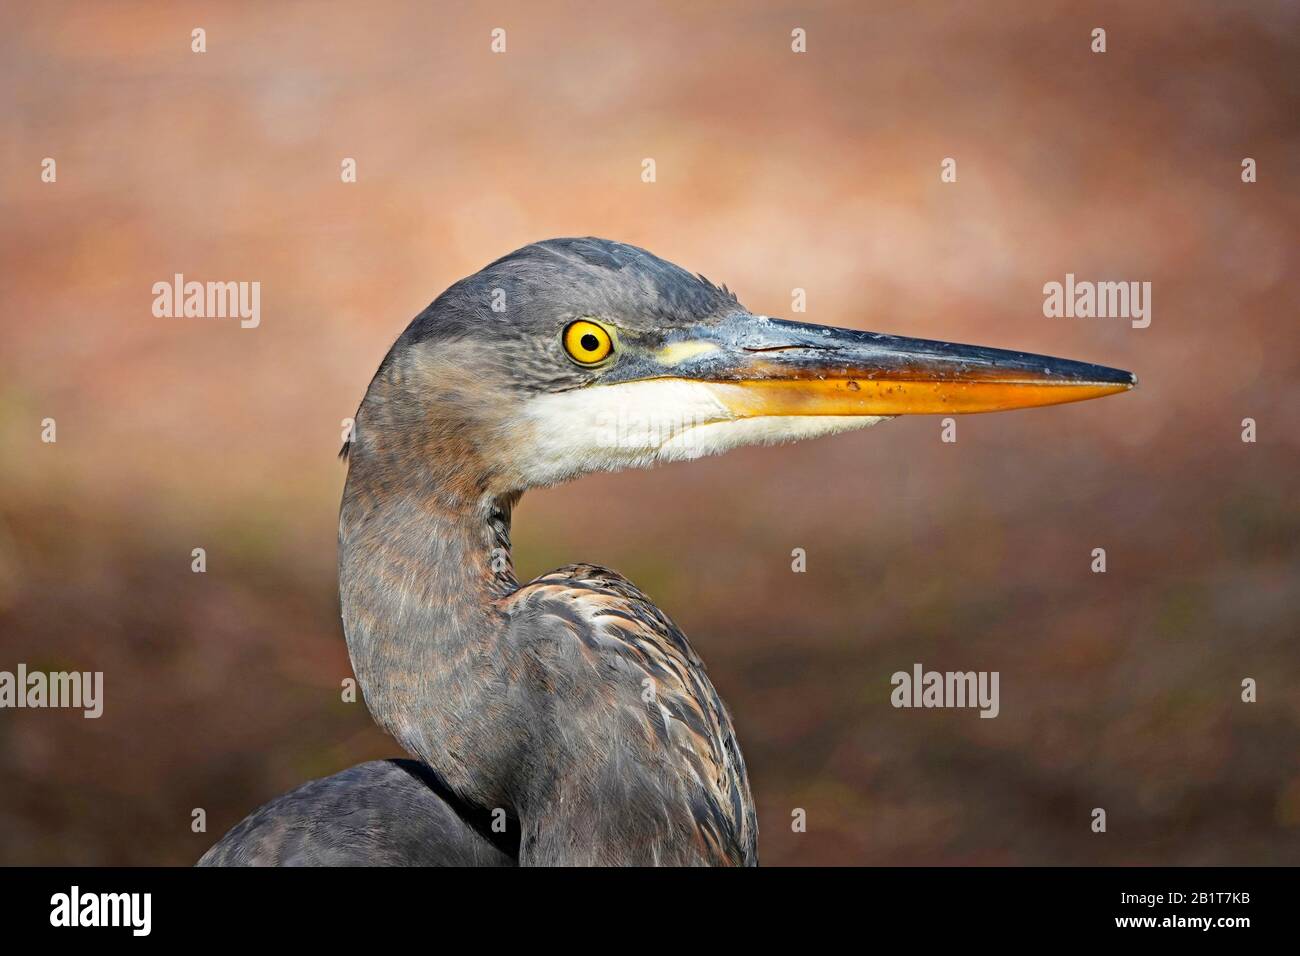 Portrait of a great blue heron, Ardea herodias, on the edge of a mountain pond in the Cascade Mountains of central Oregon. Stock Photo